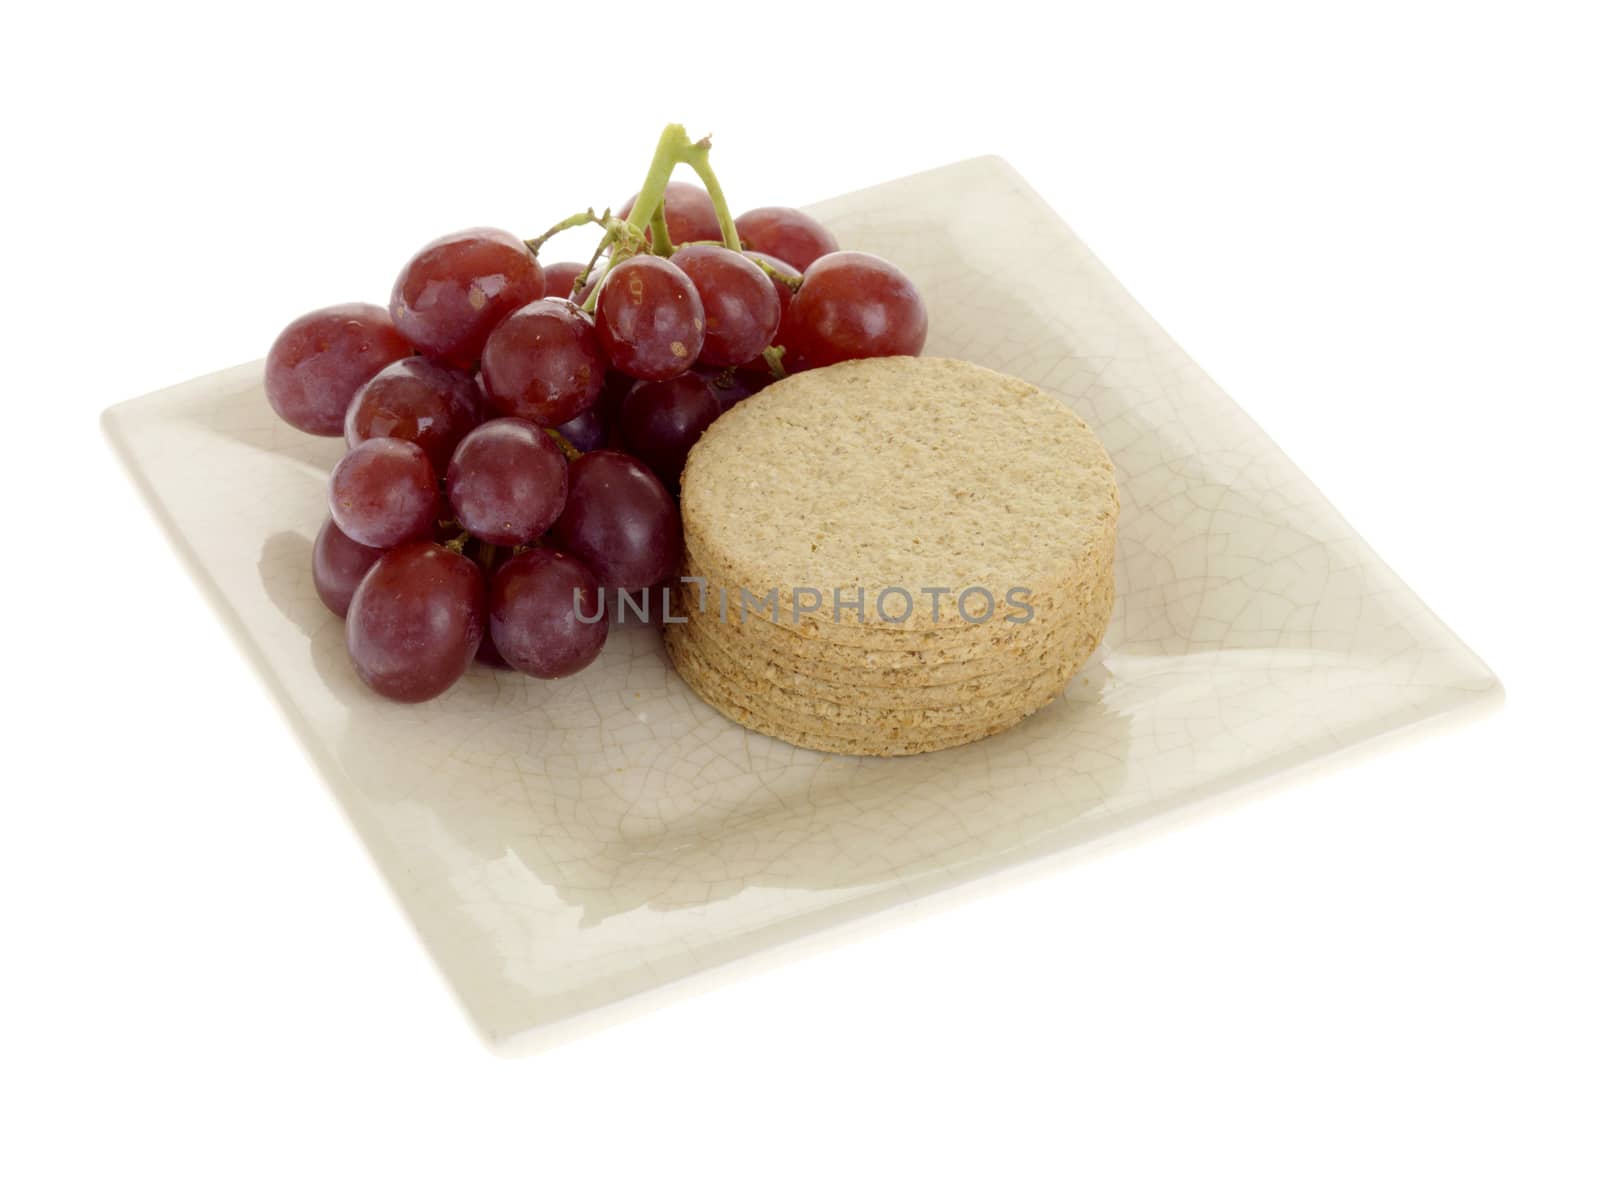 Oat Cakes with Red Grapes by Whiteboxmedia